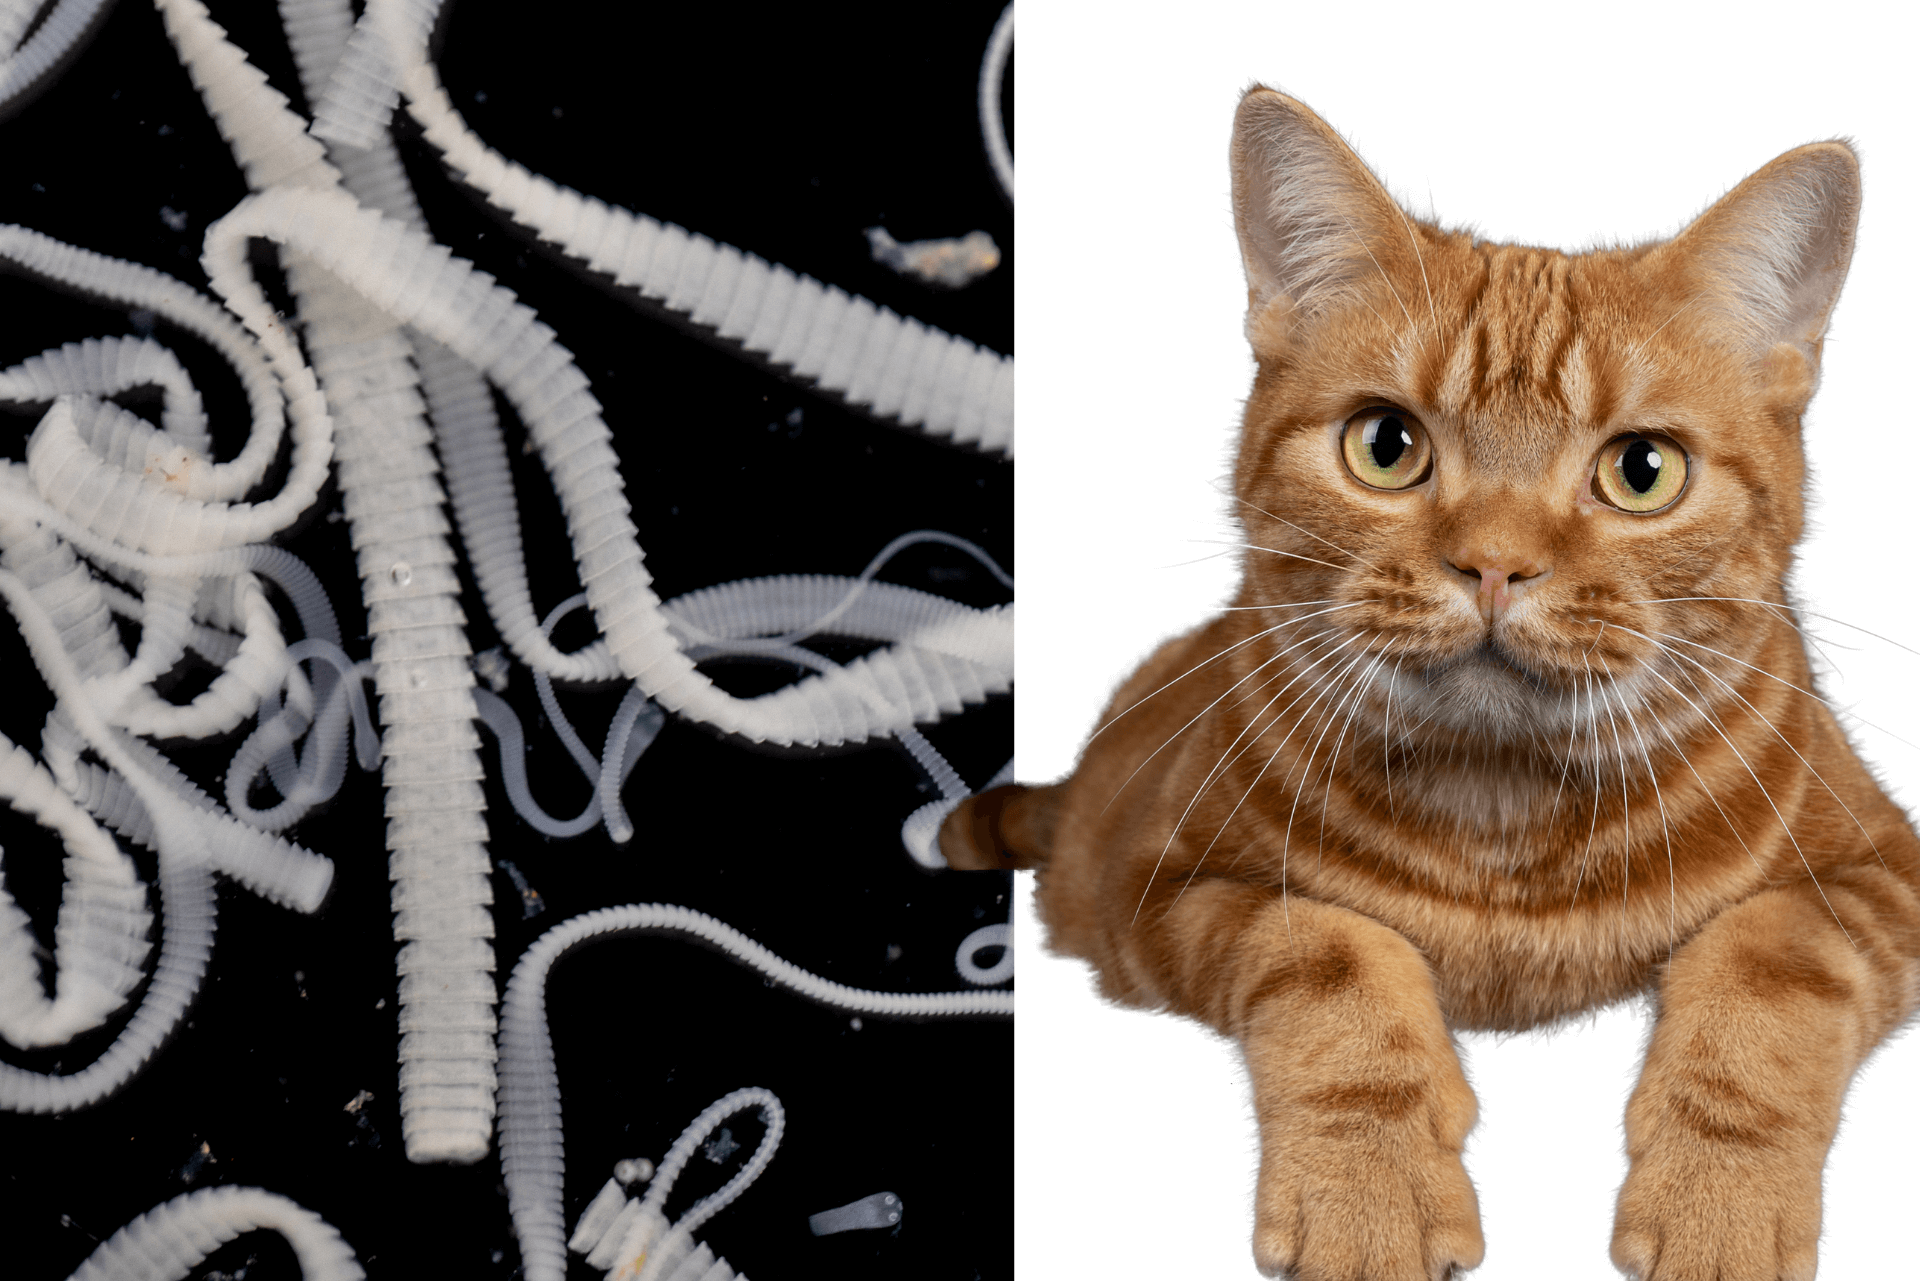 How To Get Rid of Tapeworms in Cats